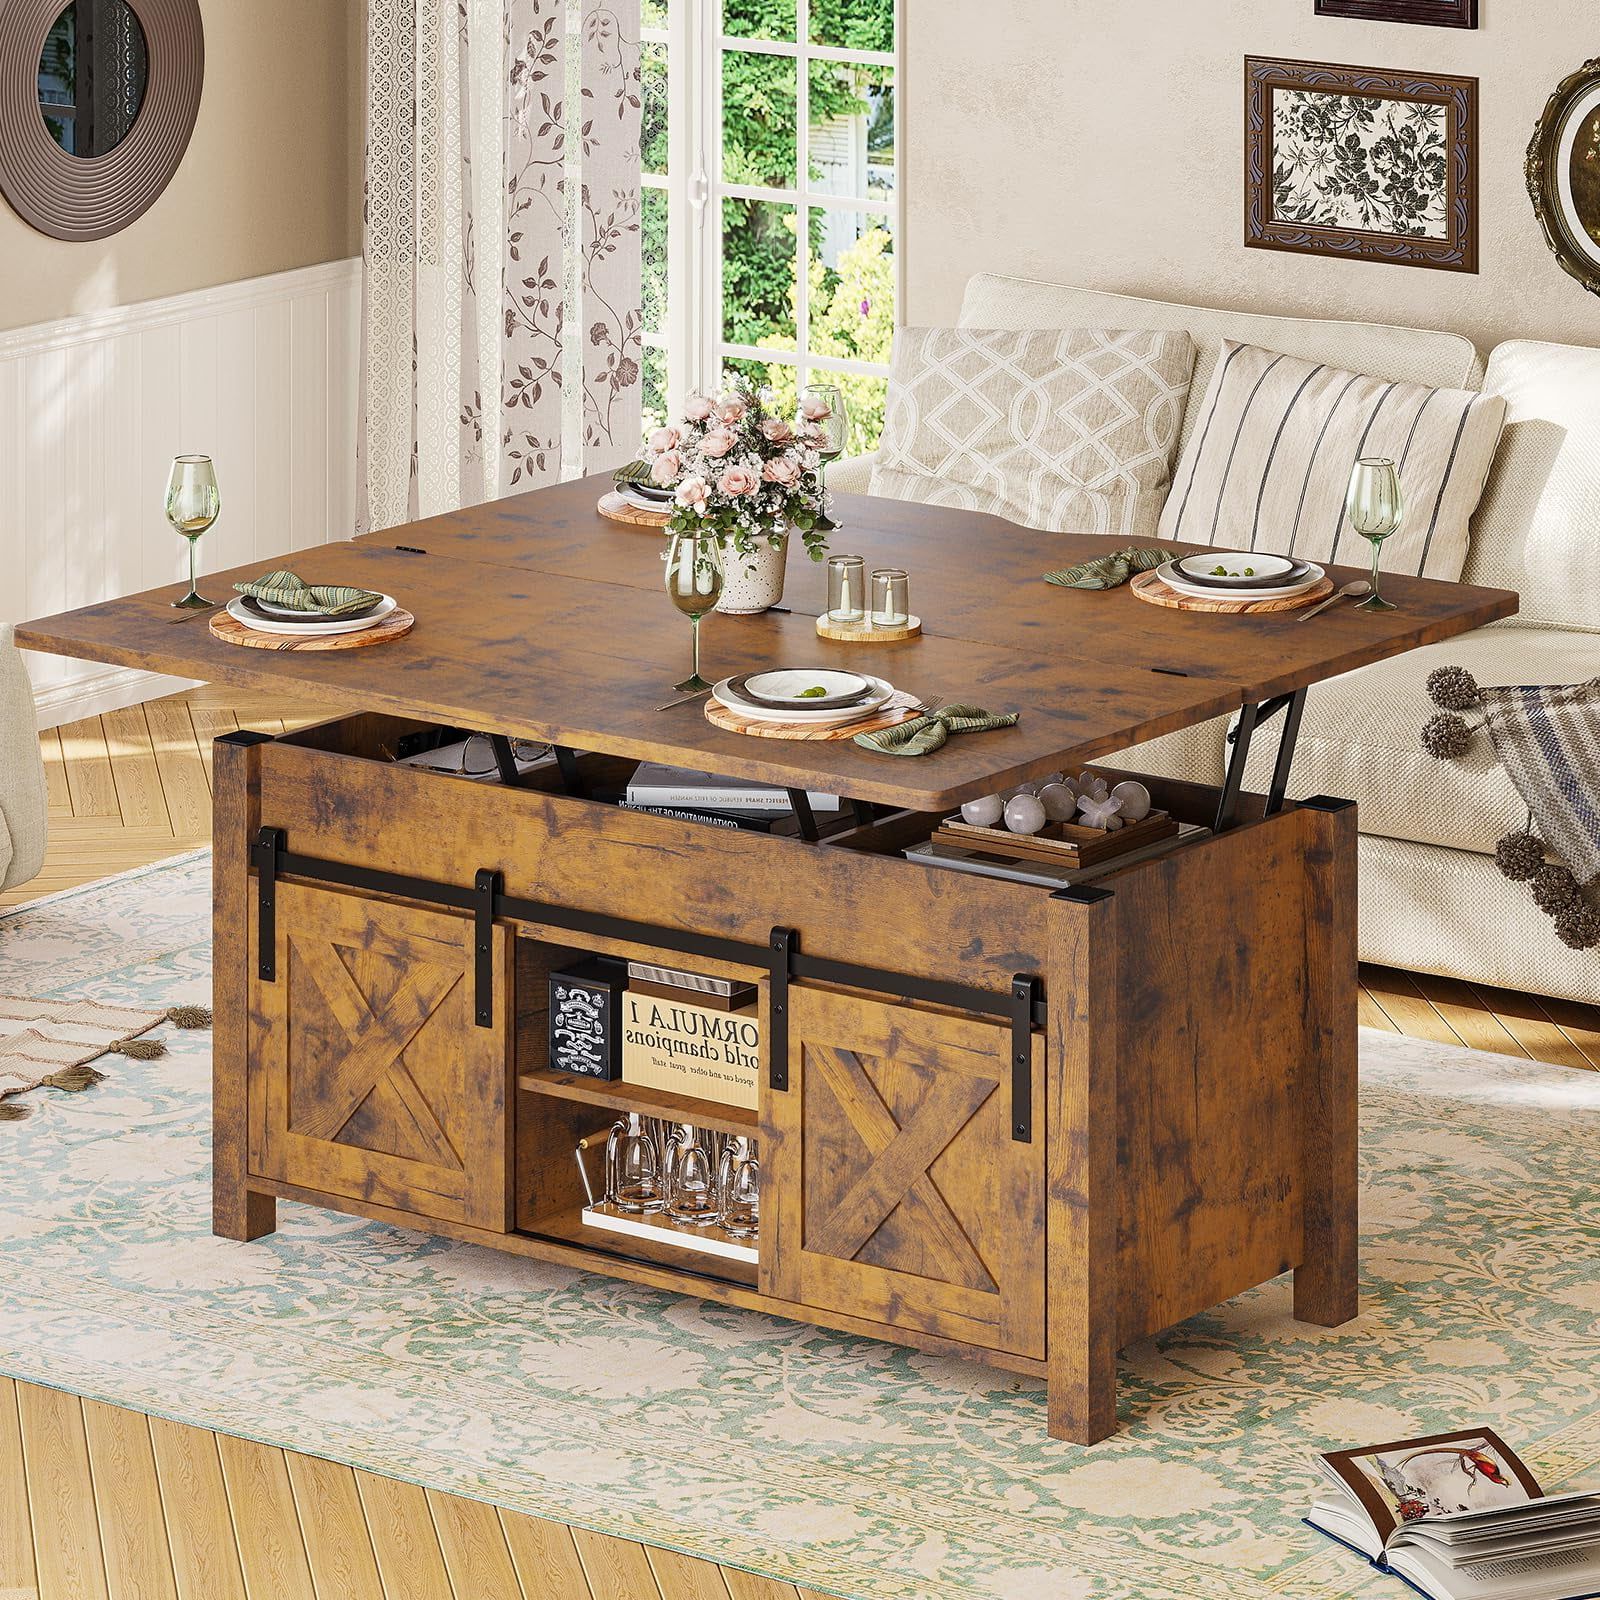 Farmhouse Lift Top Tables Throughout Well Known Coffee Table For Living Room, Farmhouse Lift Top Coffee Tables With Storage  And Hidden Compartment, Rising Tabletop Center Table For Living Room  Reception Room, Rustic Brown – Walmart (View 10 of 10)